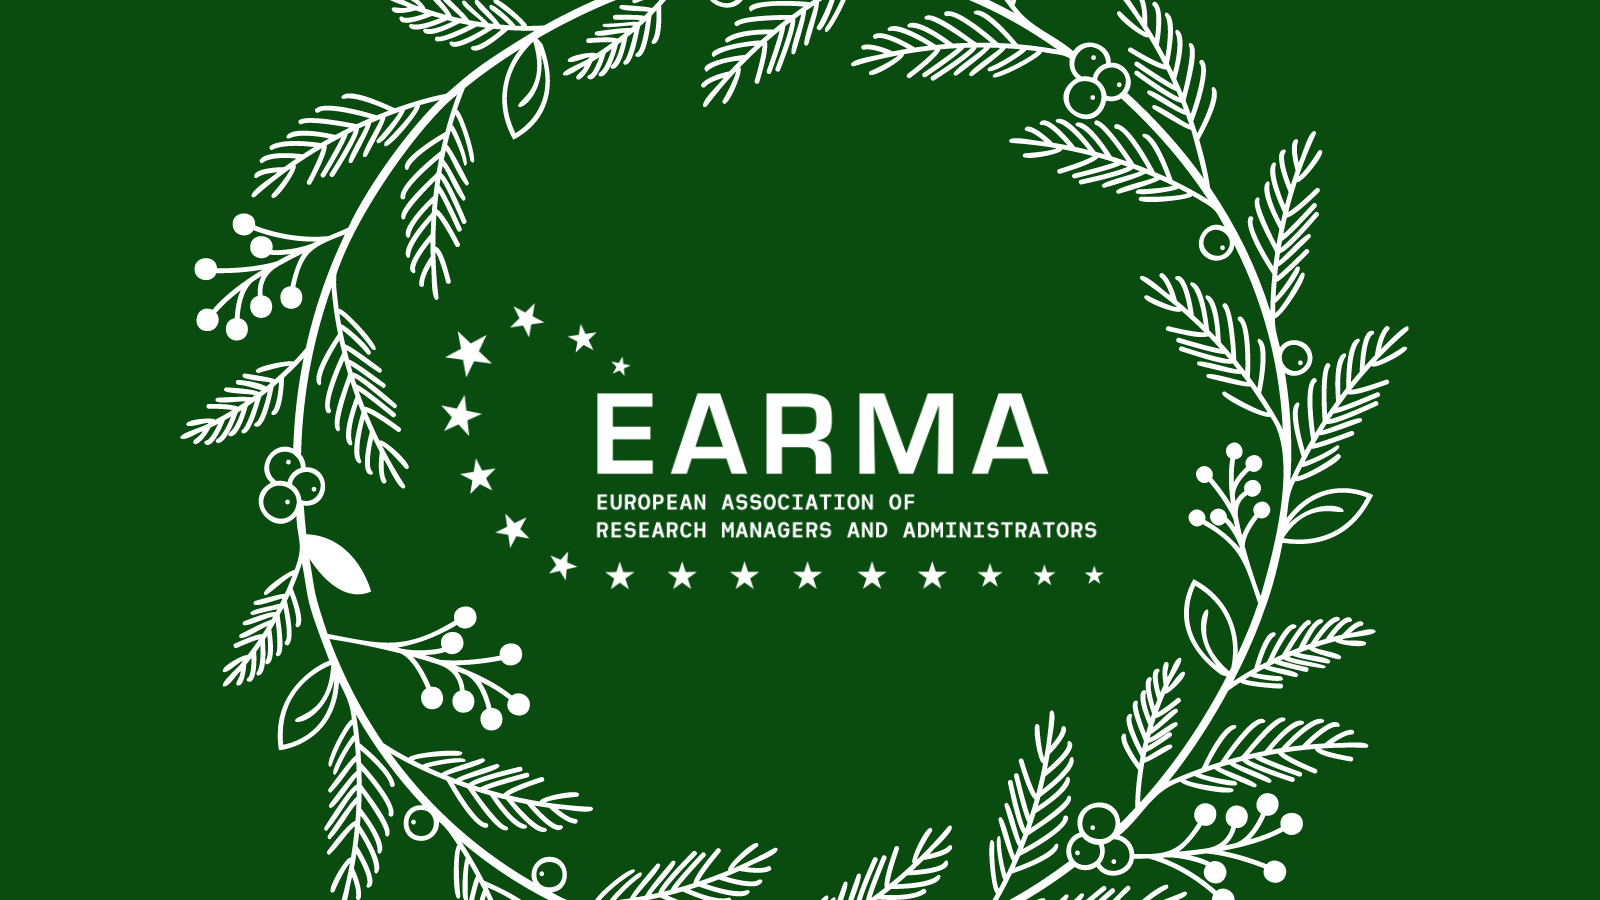 EARMA Online end-of-the-year party!